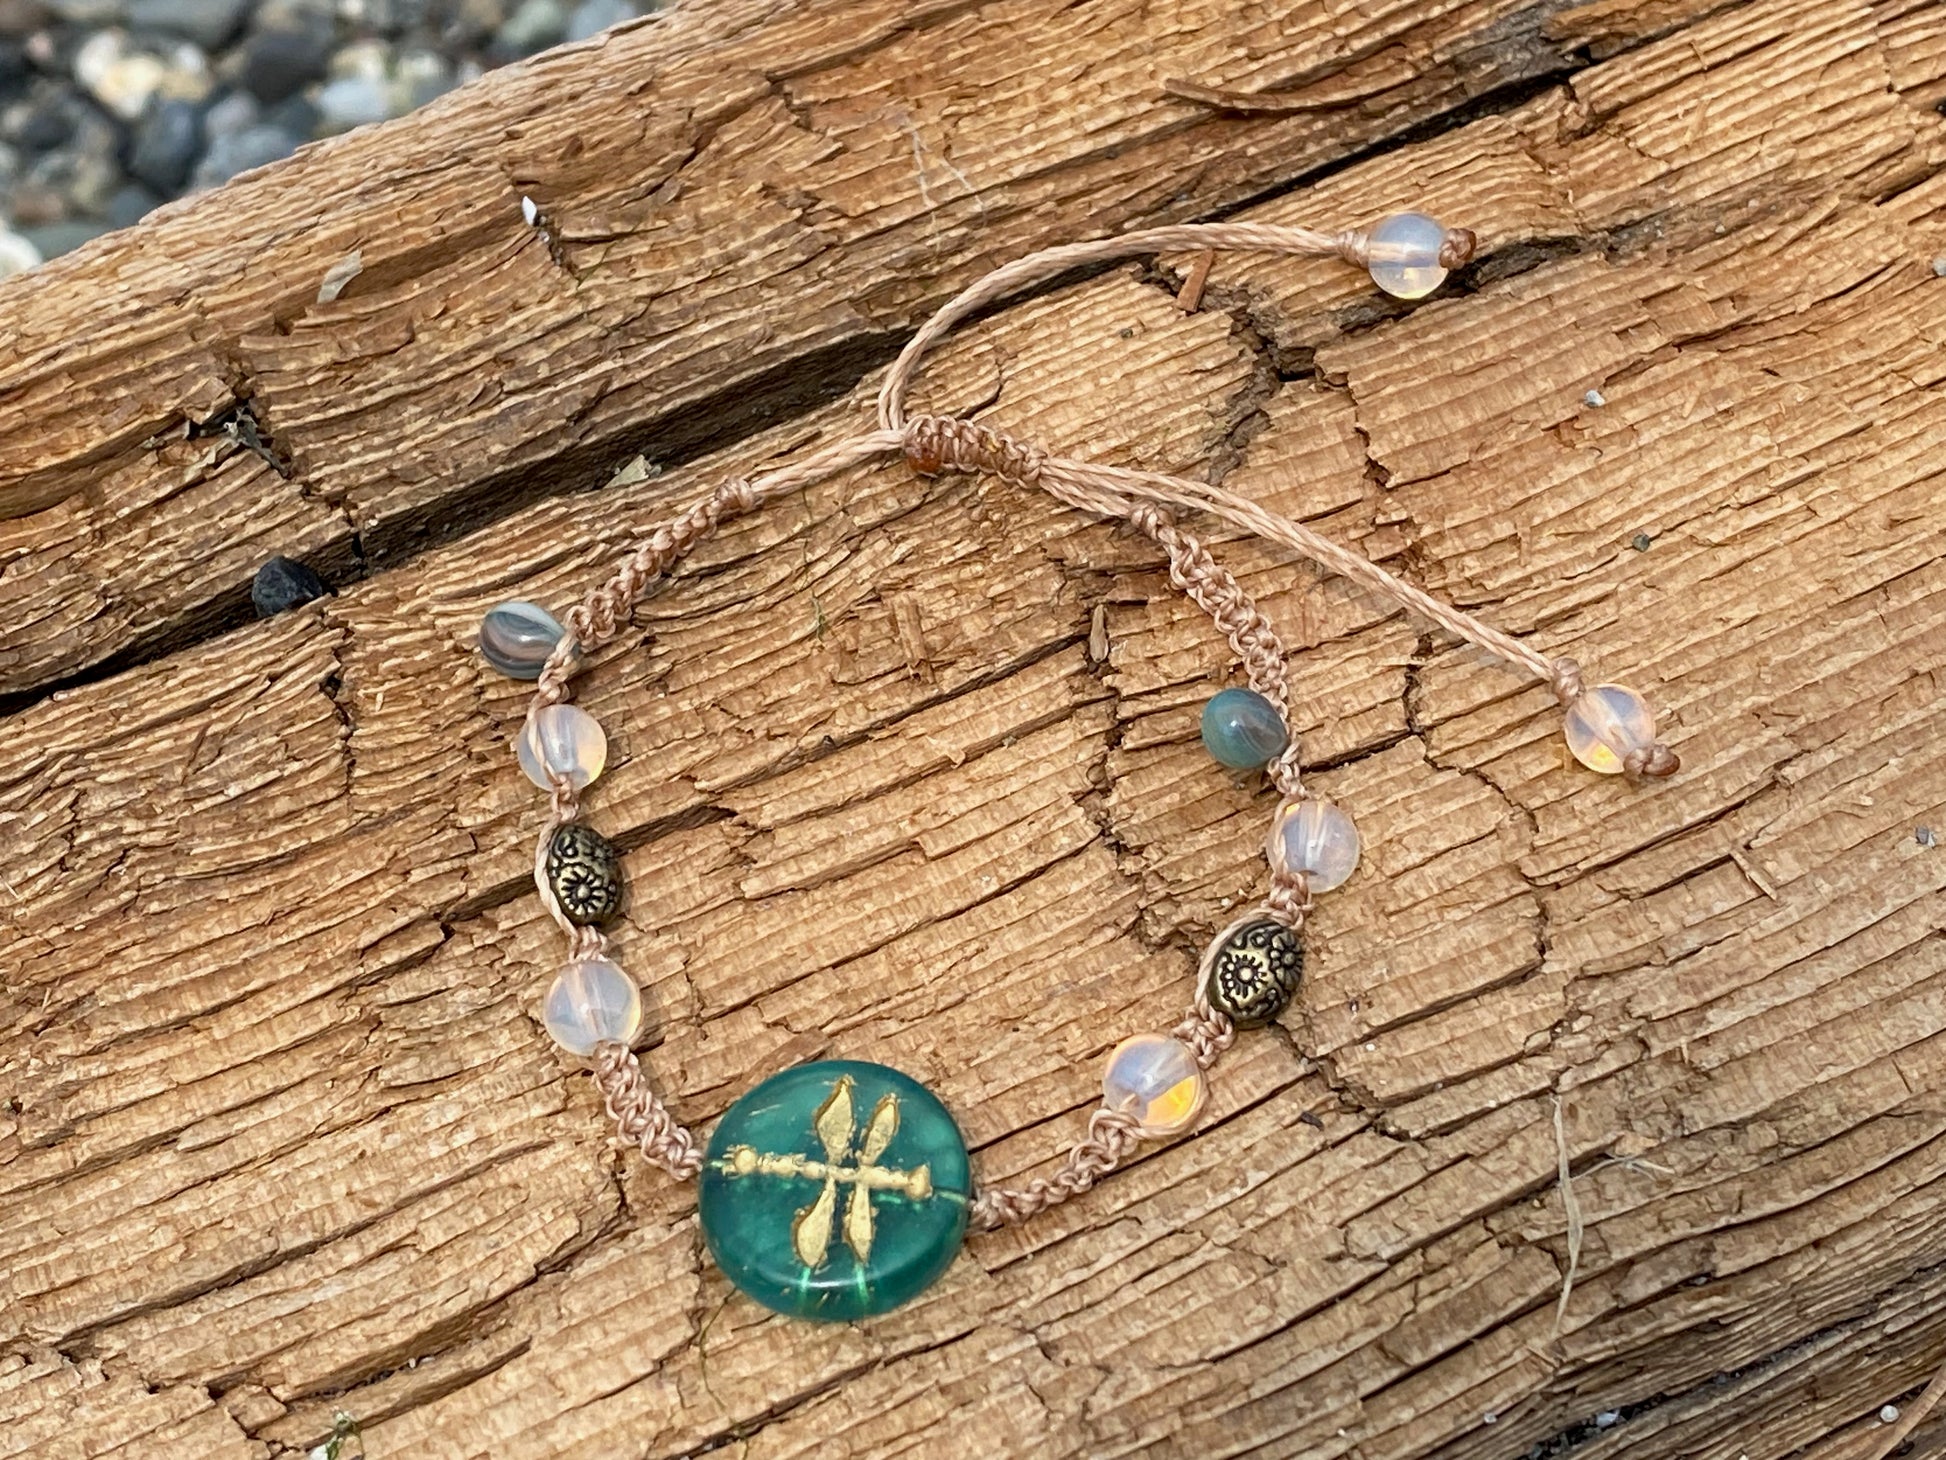 Beautiful Woven bracelet with aqua dragonfly coin bead , sparkle beads, antique copper beads on a piece of driftwood by the ocean